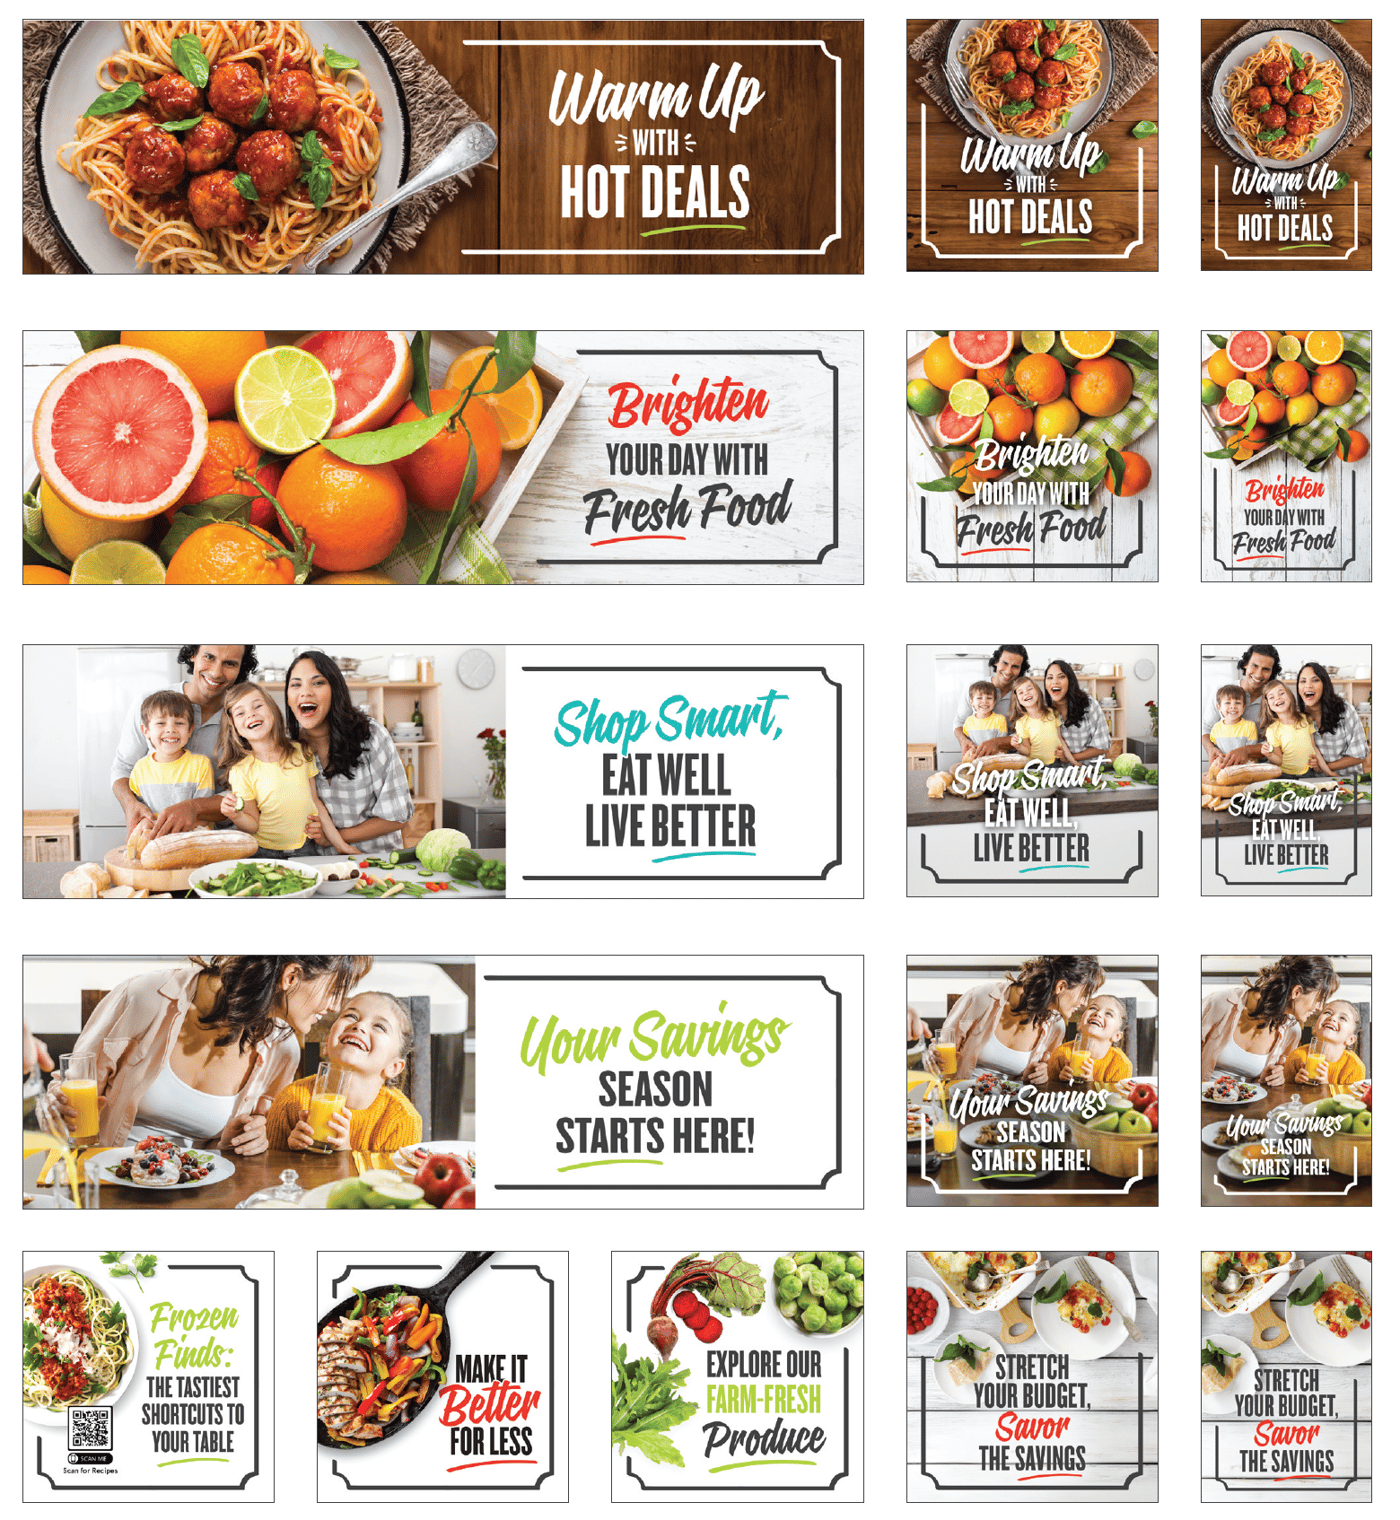 Q1 2024 Signage, including "Warm up with hot deals;" "Brighten your day with fresh food"